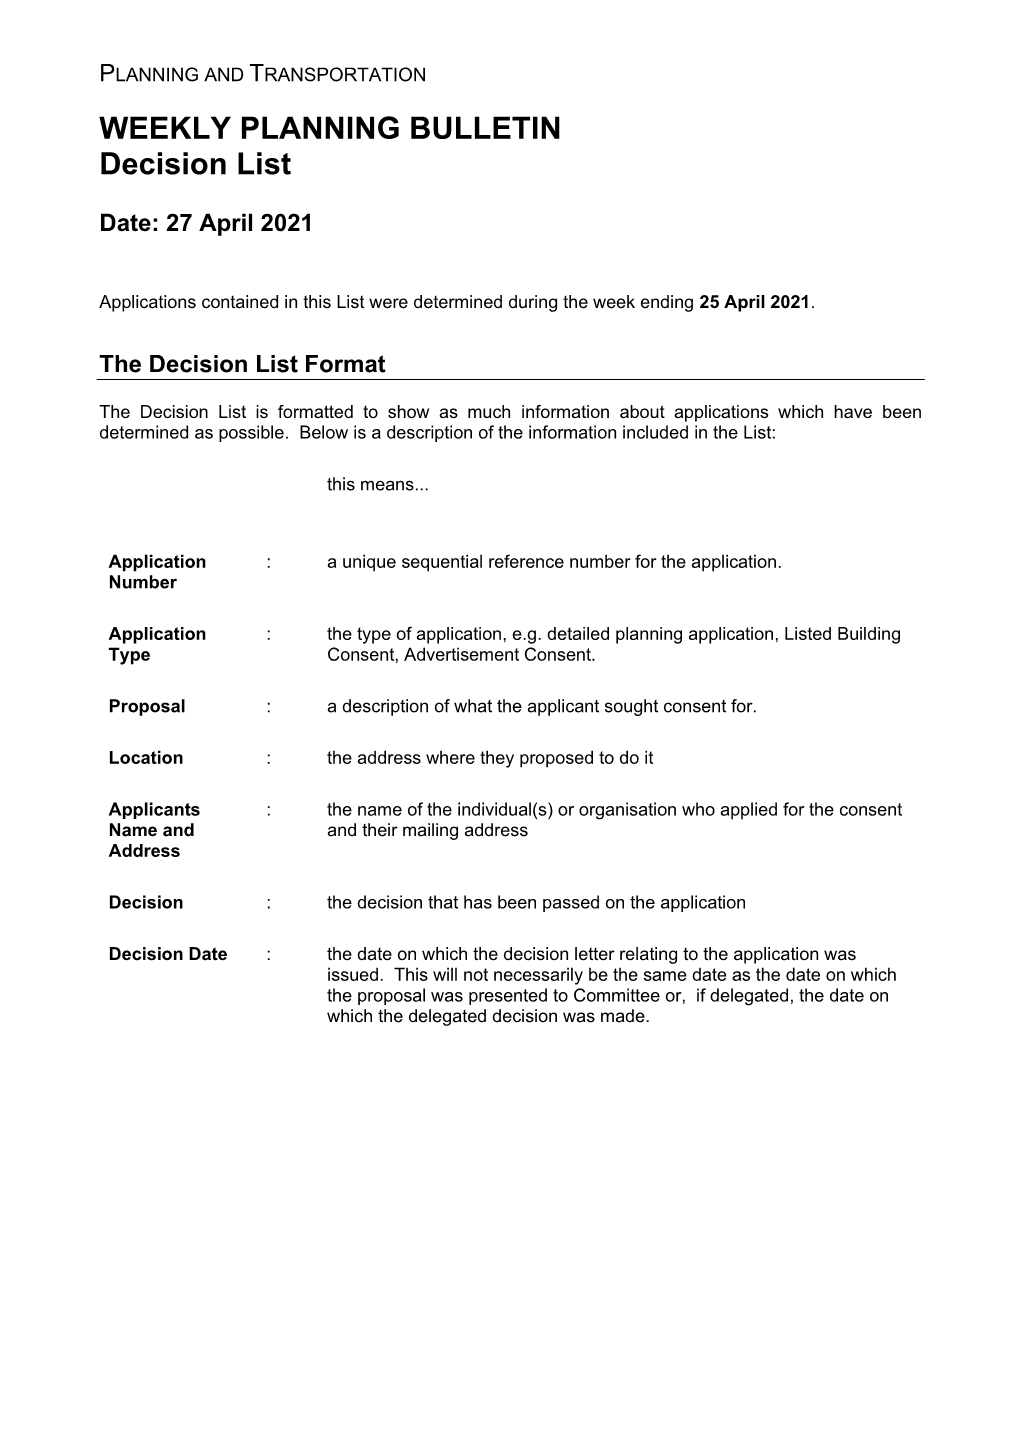 Planning Applications Determined 25 April 2021